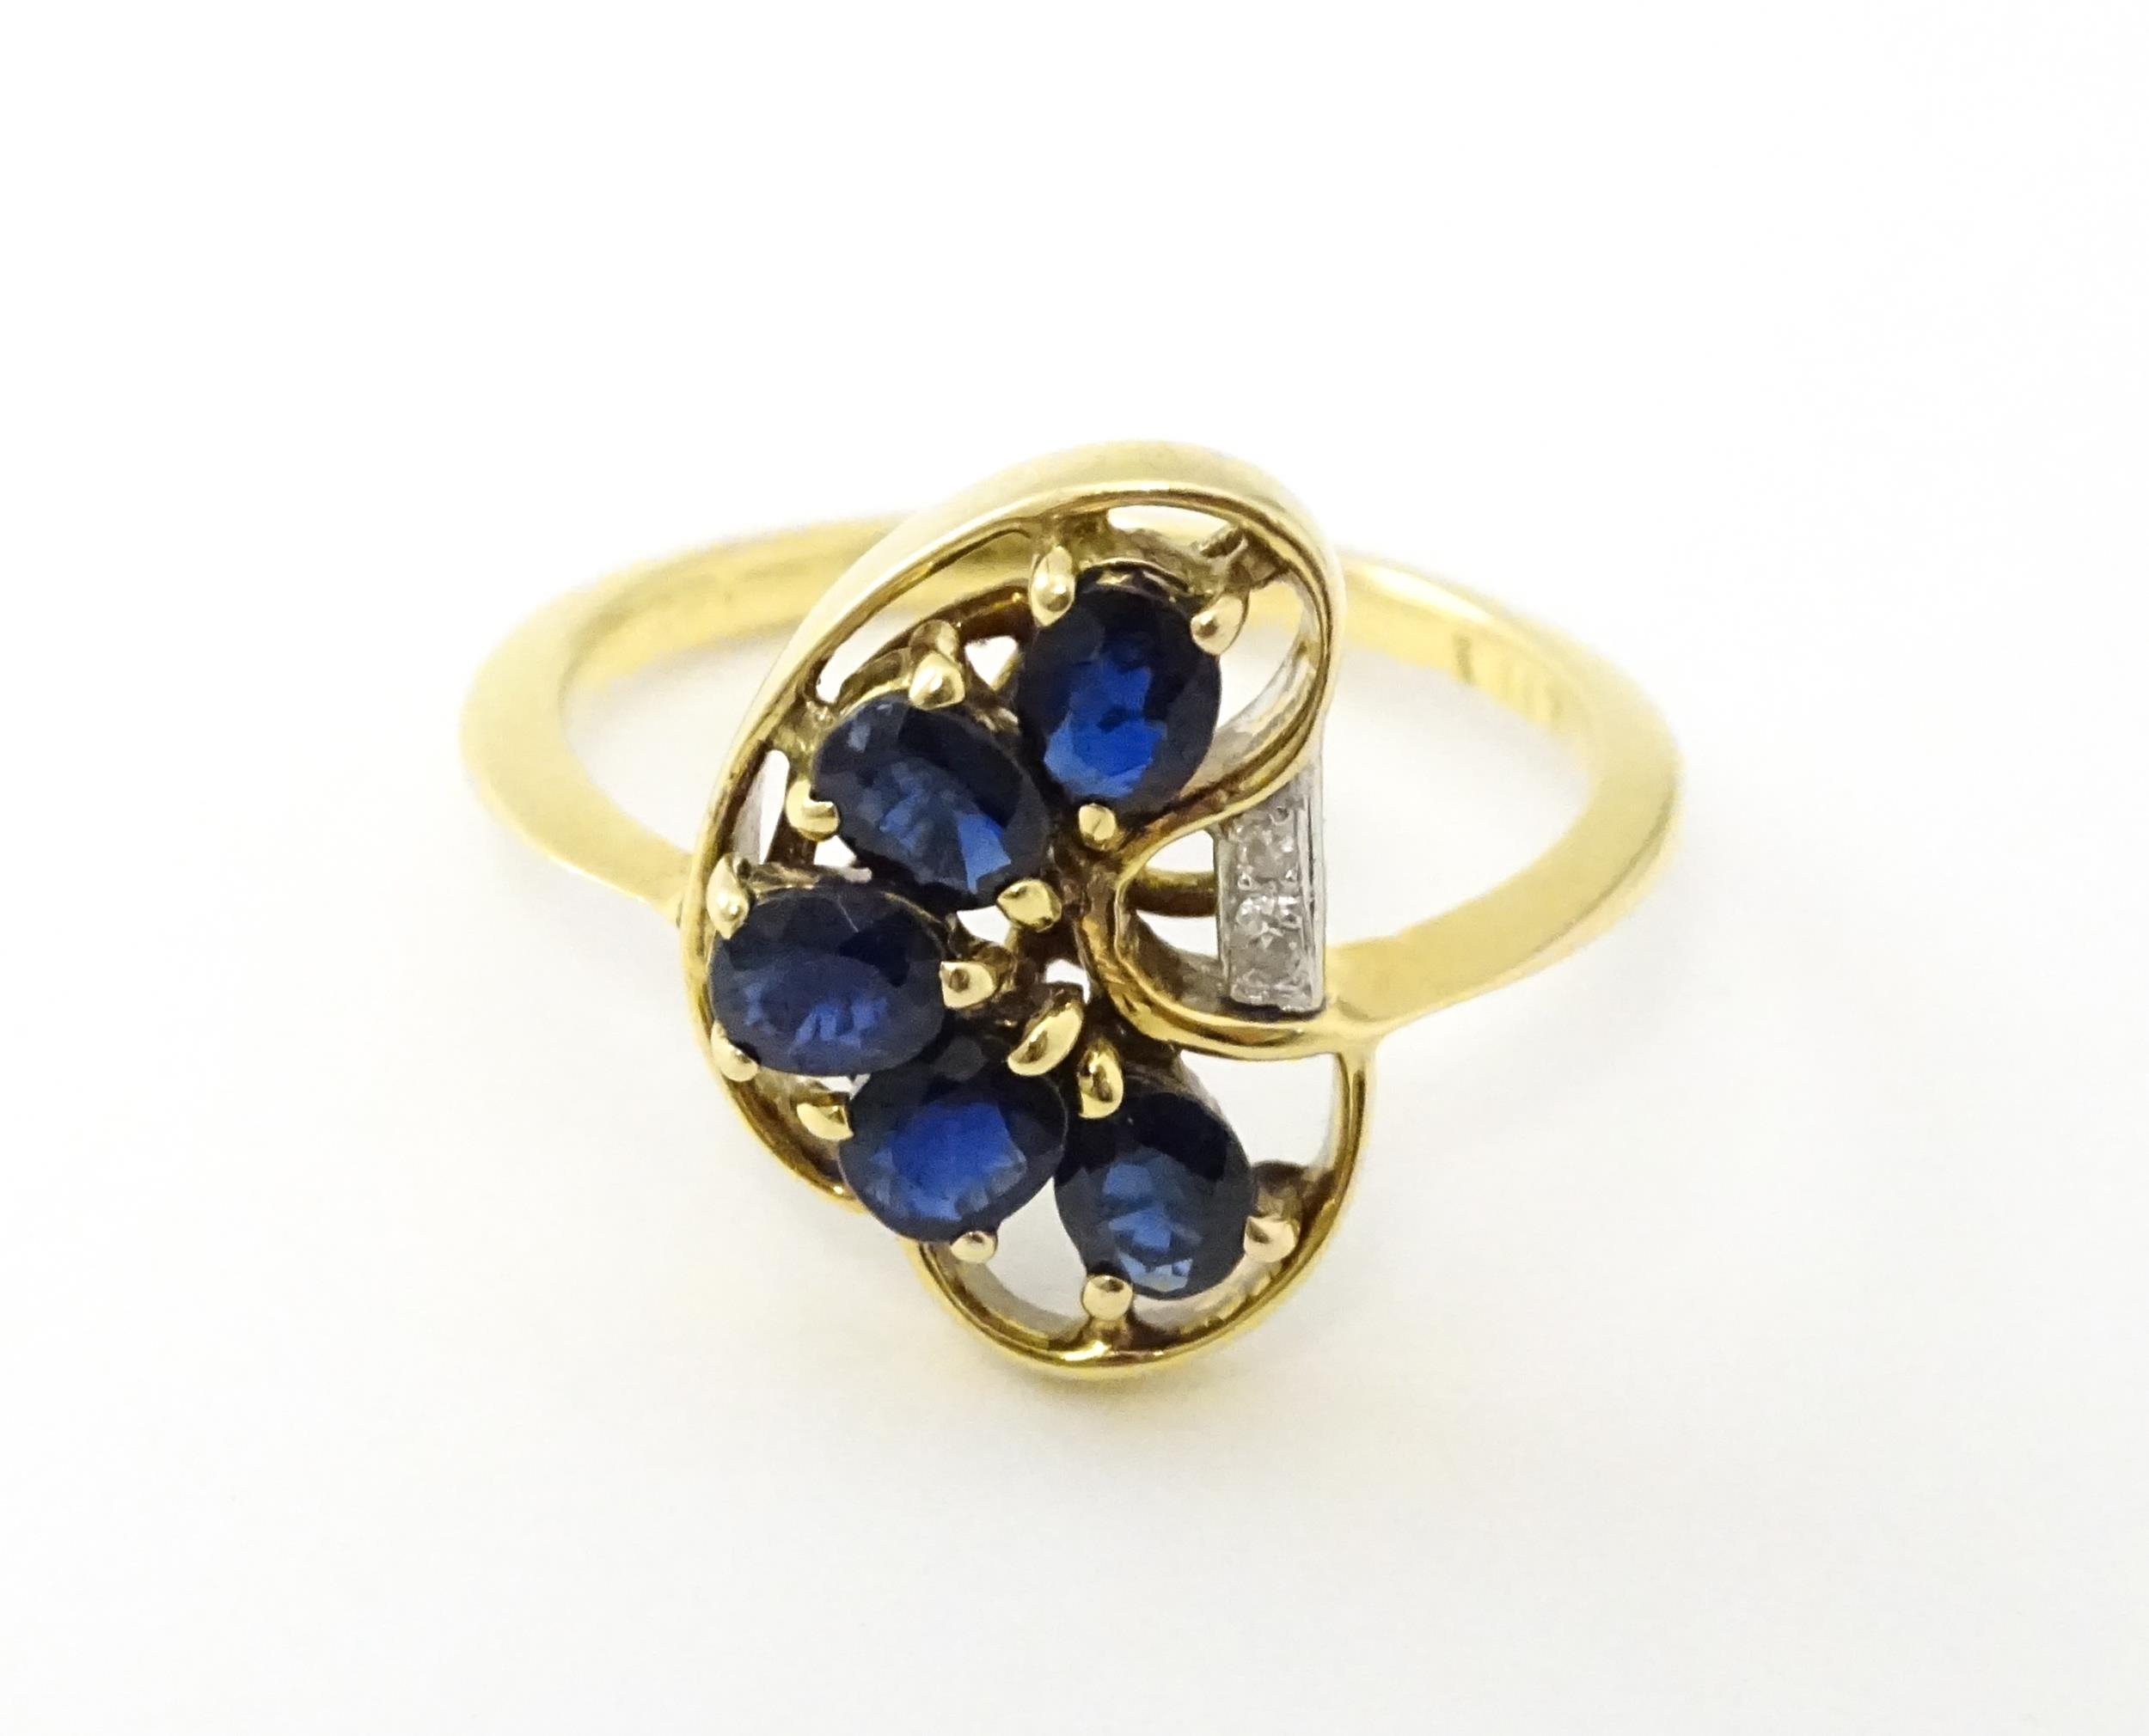 A 9ct gold ring set with 5 graduated blue spinel and two diamonds. Ring size approx. L 1/2 Please